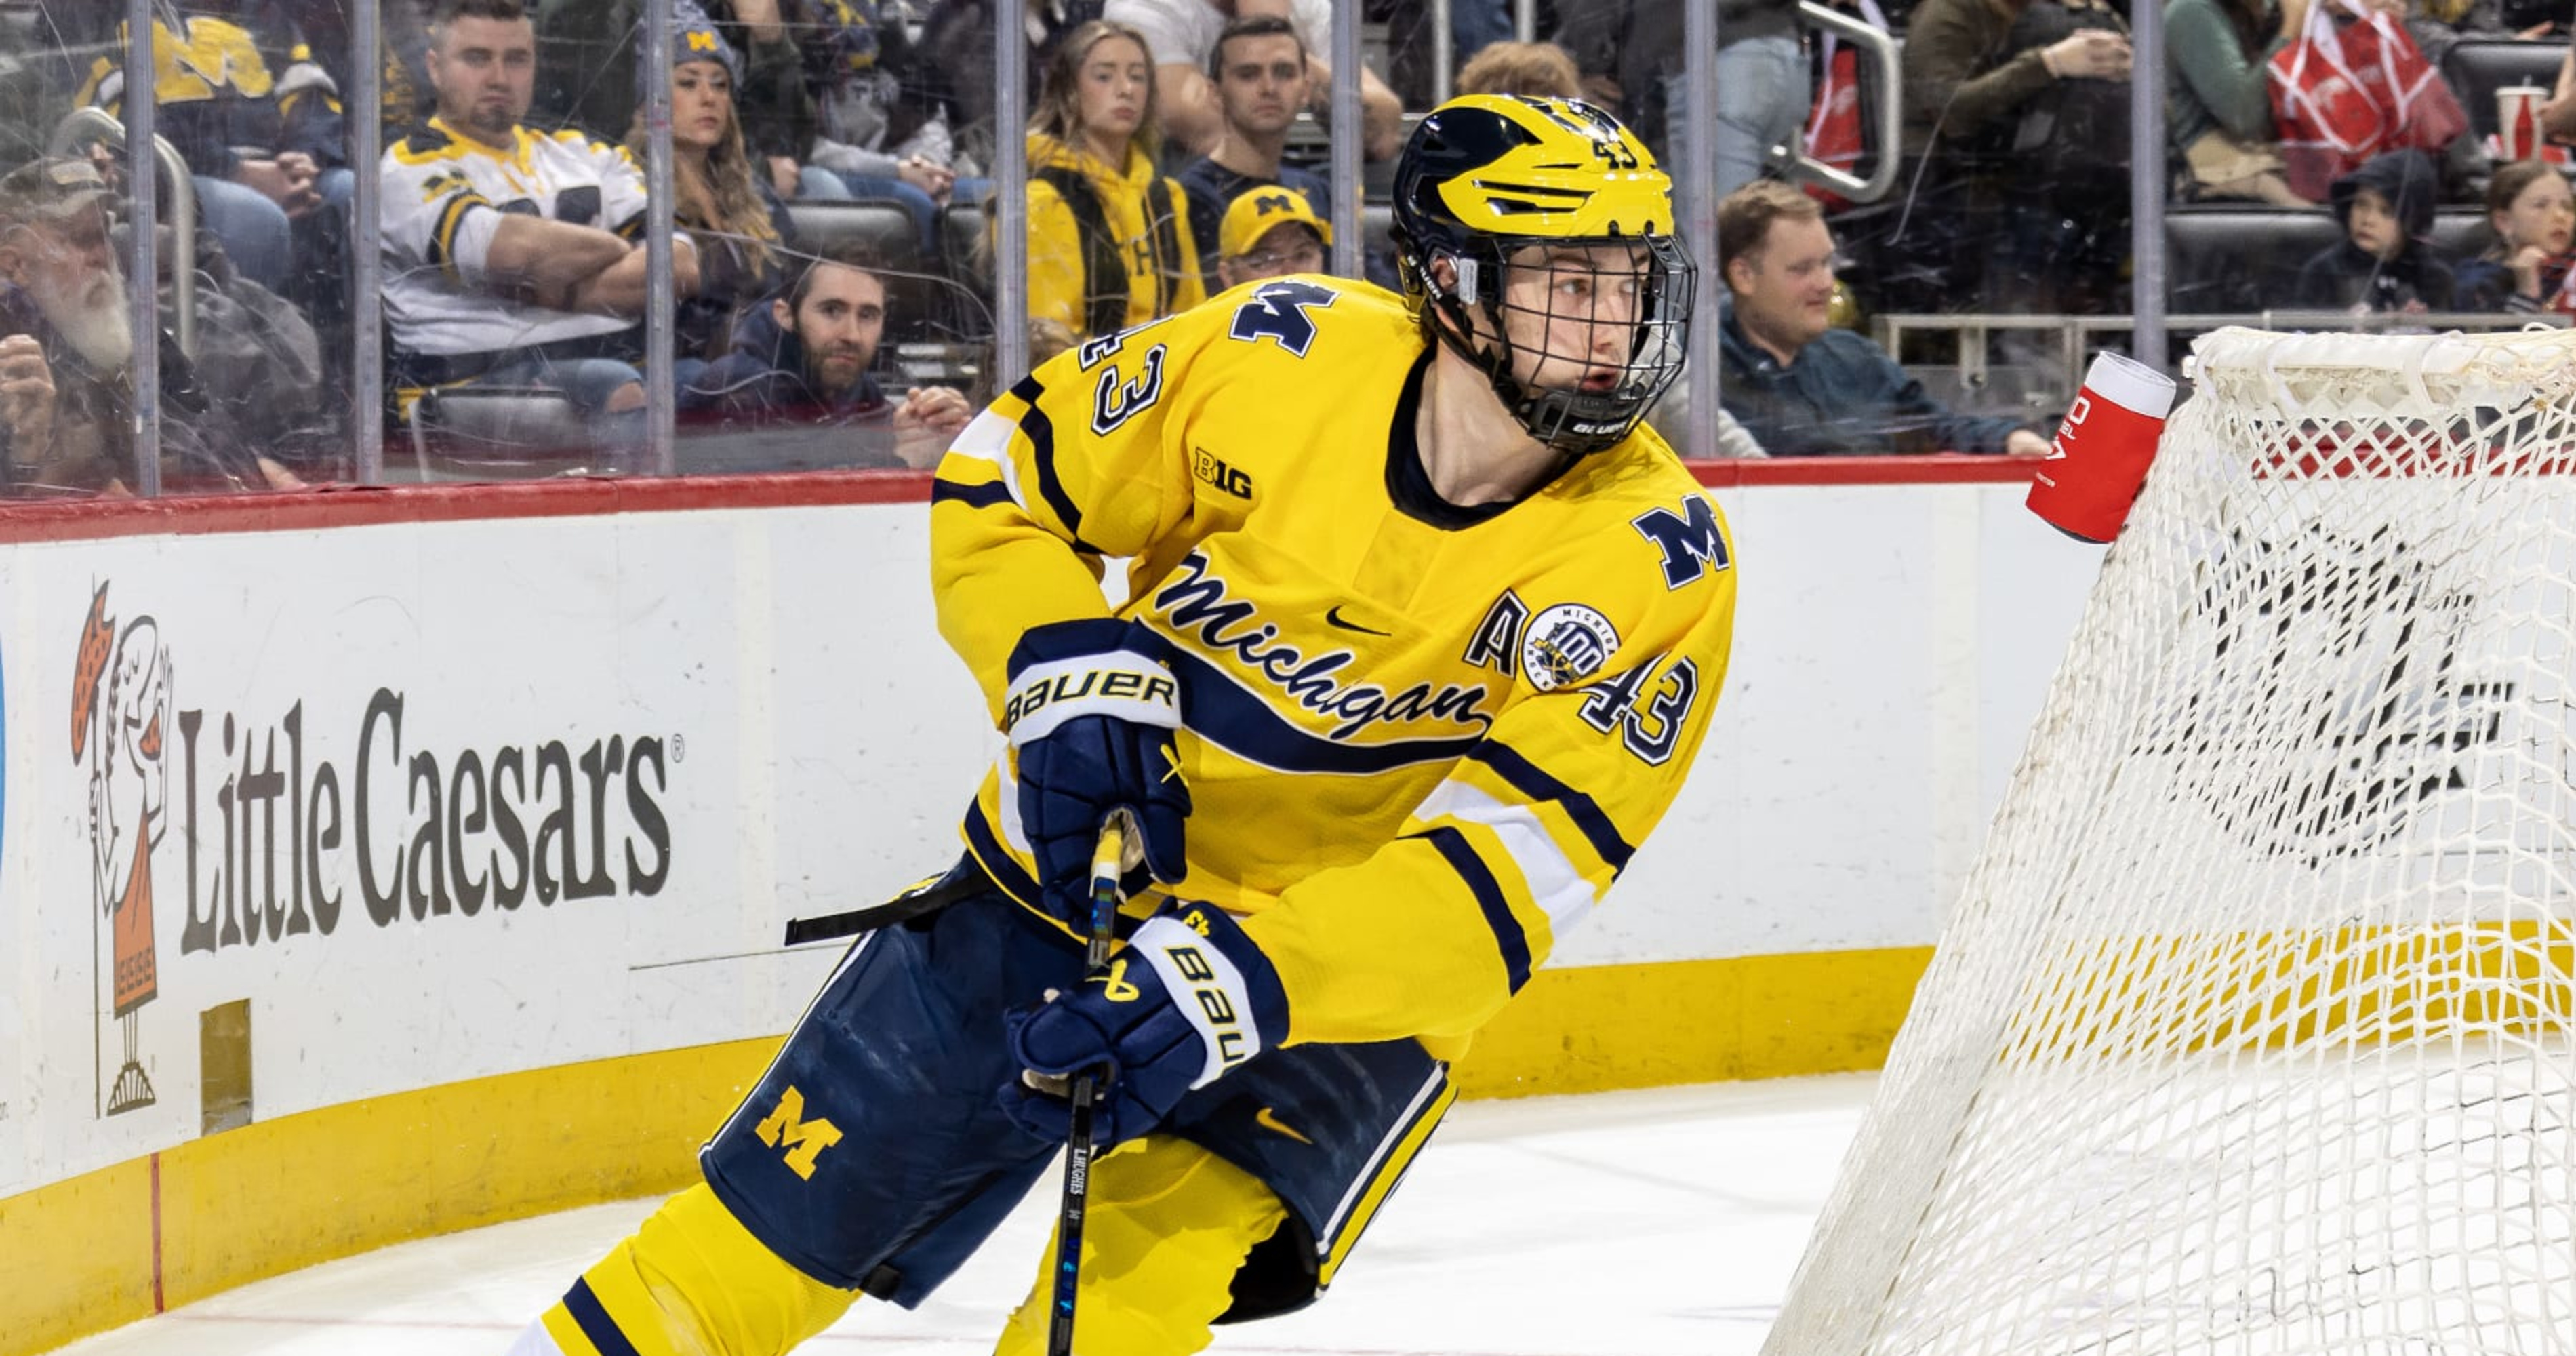 Michigan hockey: Quinn and Jack Hughes could both play for Wolverines